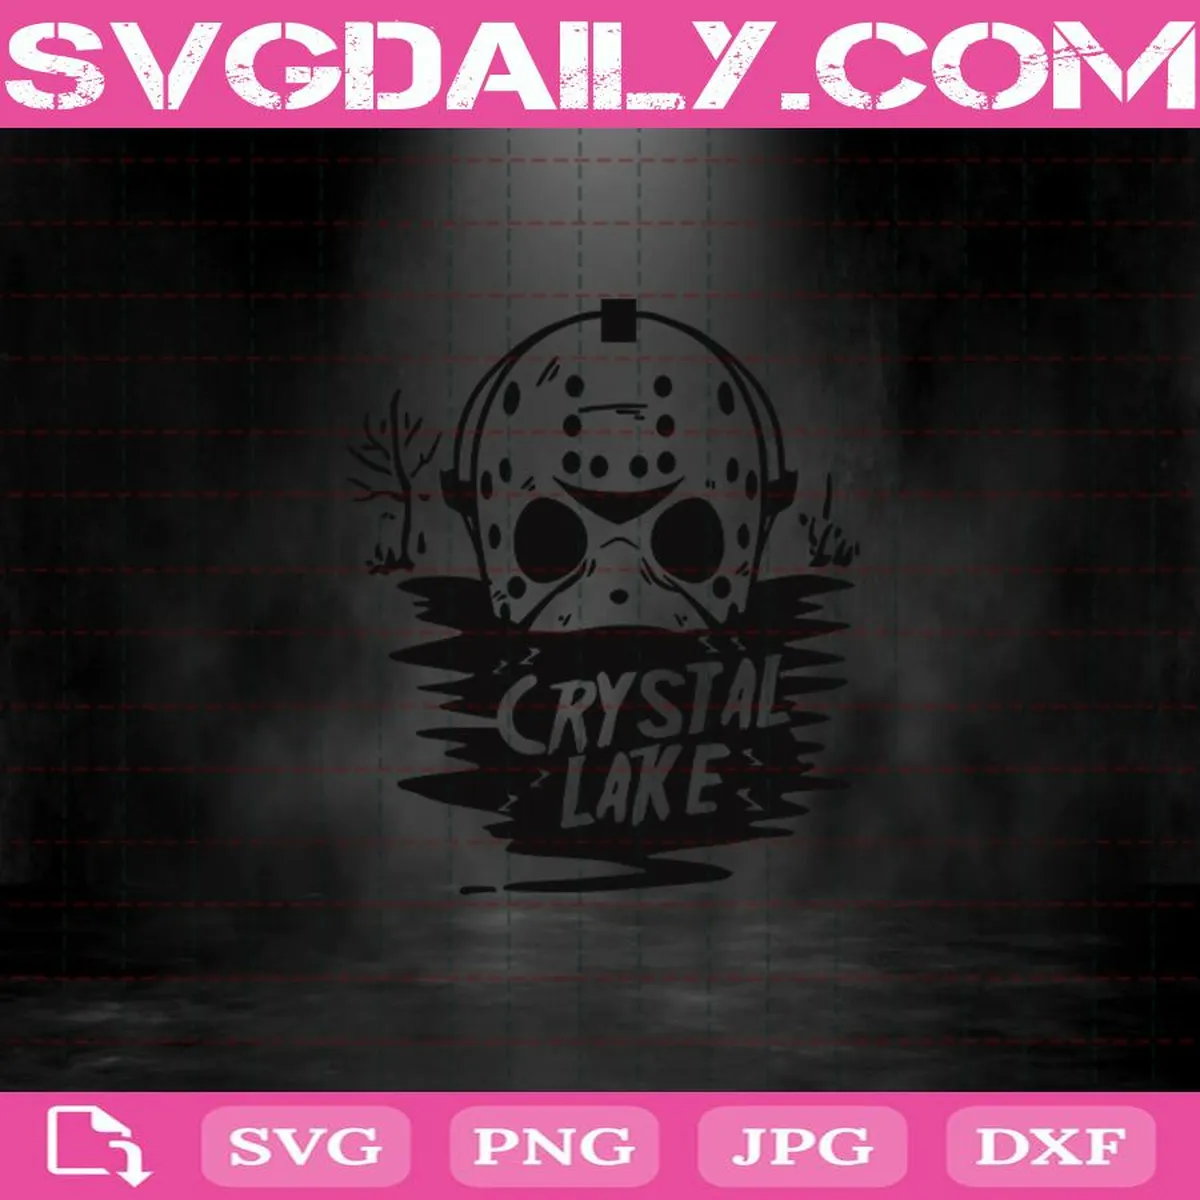 Jason Voorhees Friday the 13th Crystal Lake Svg, Jason Voorhees Halloween Svg, Crystal Lake Svg, Halloween Svg